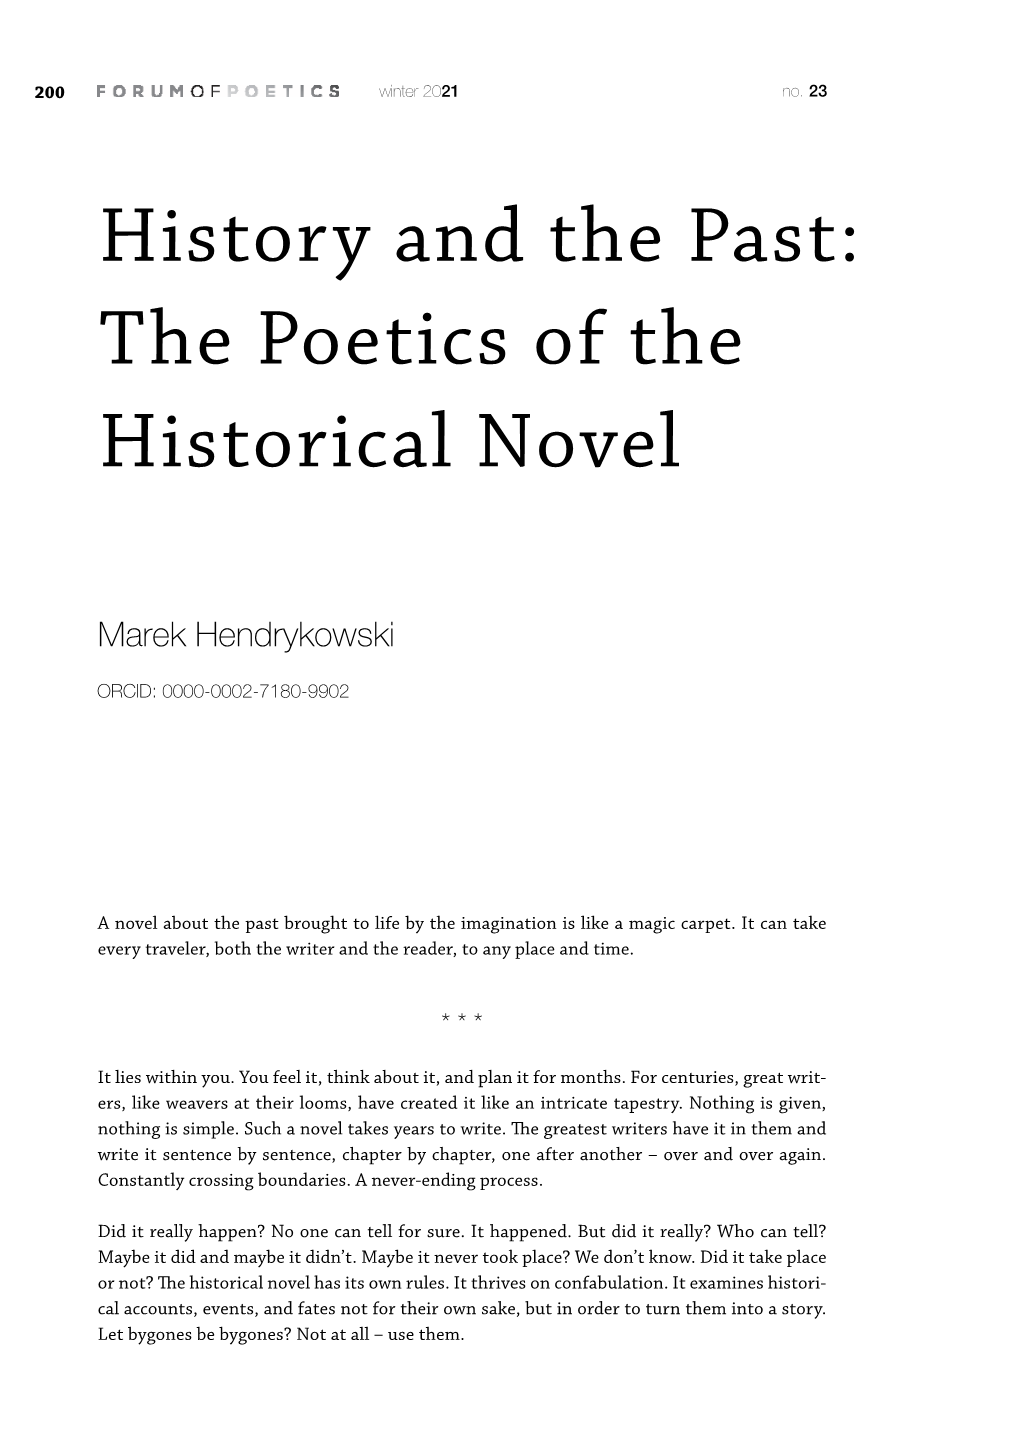 History and the Past: the Poetics of the Historical Novel